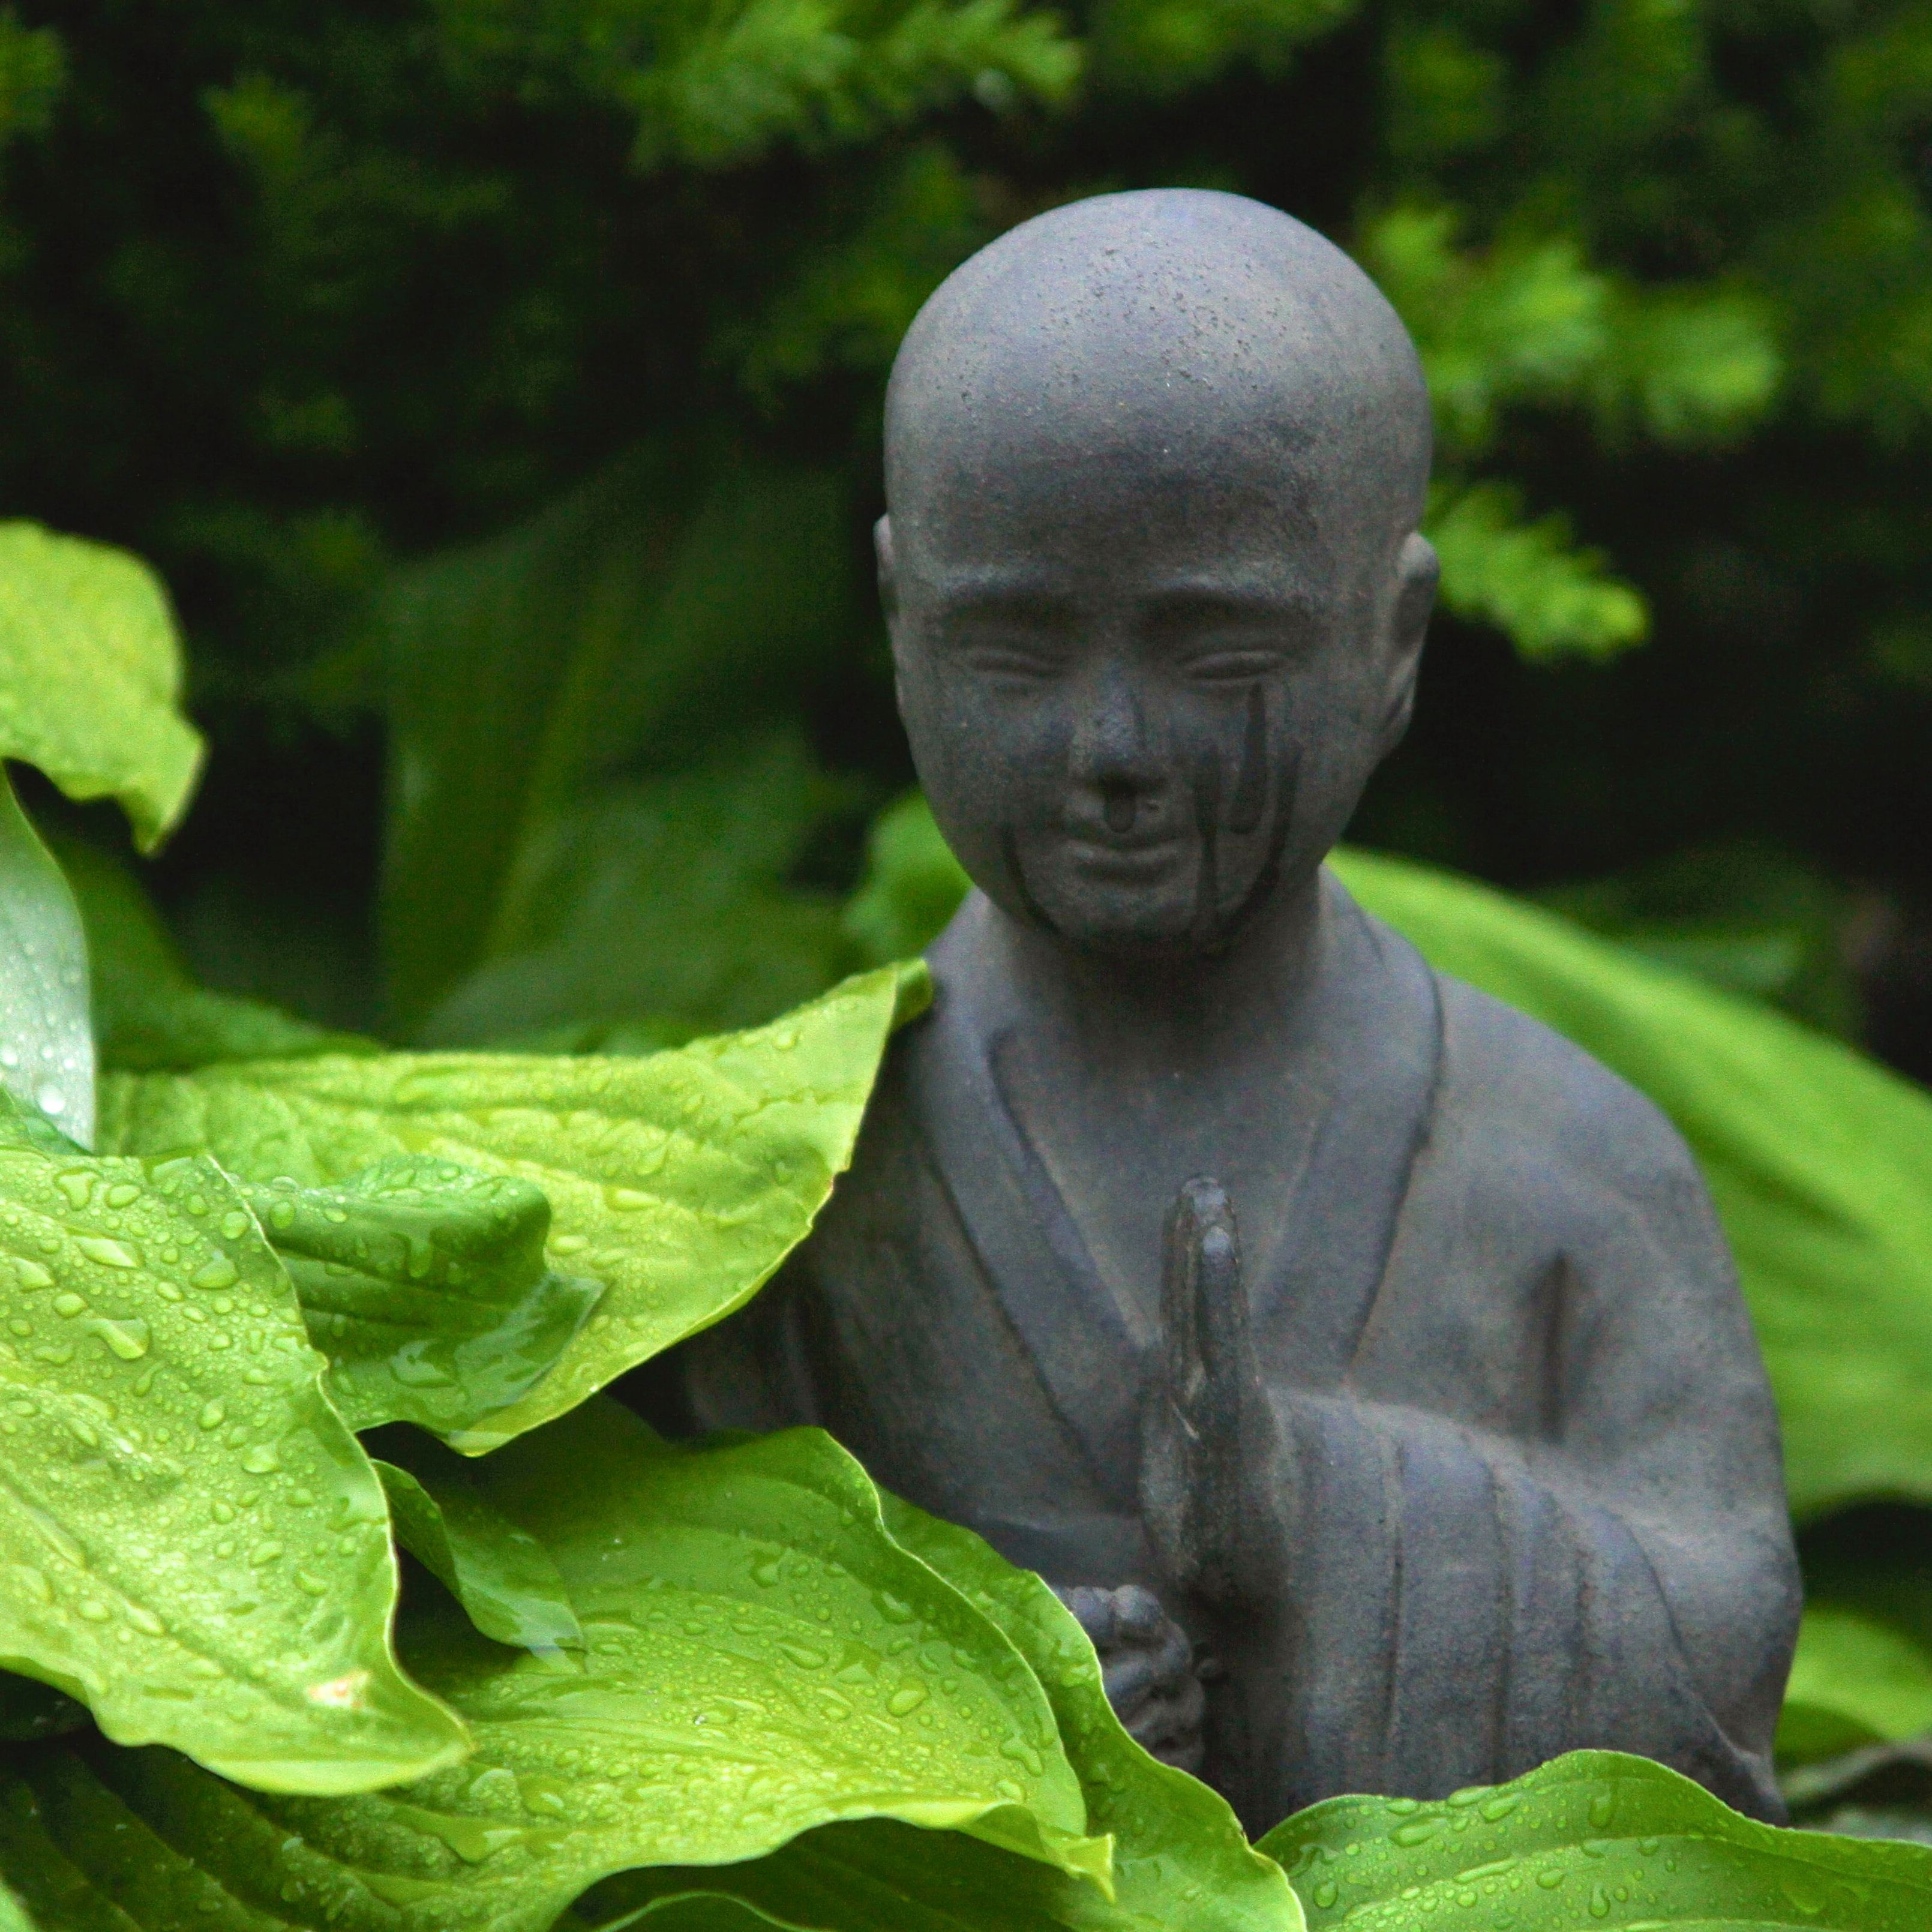 black stone statue of meditating figure amidst bright green leaves in garden